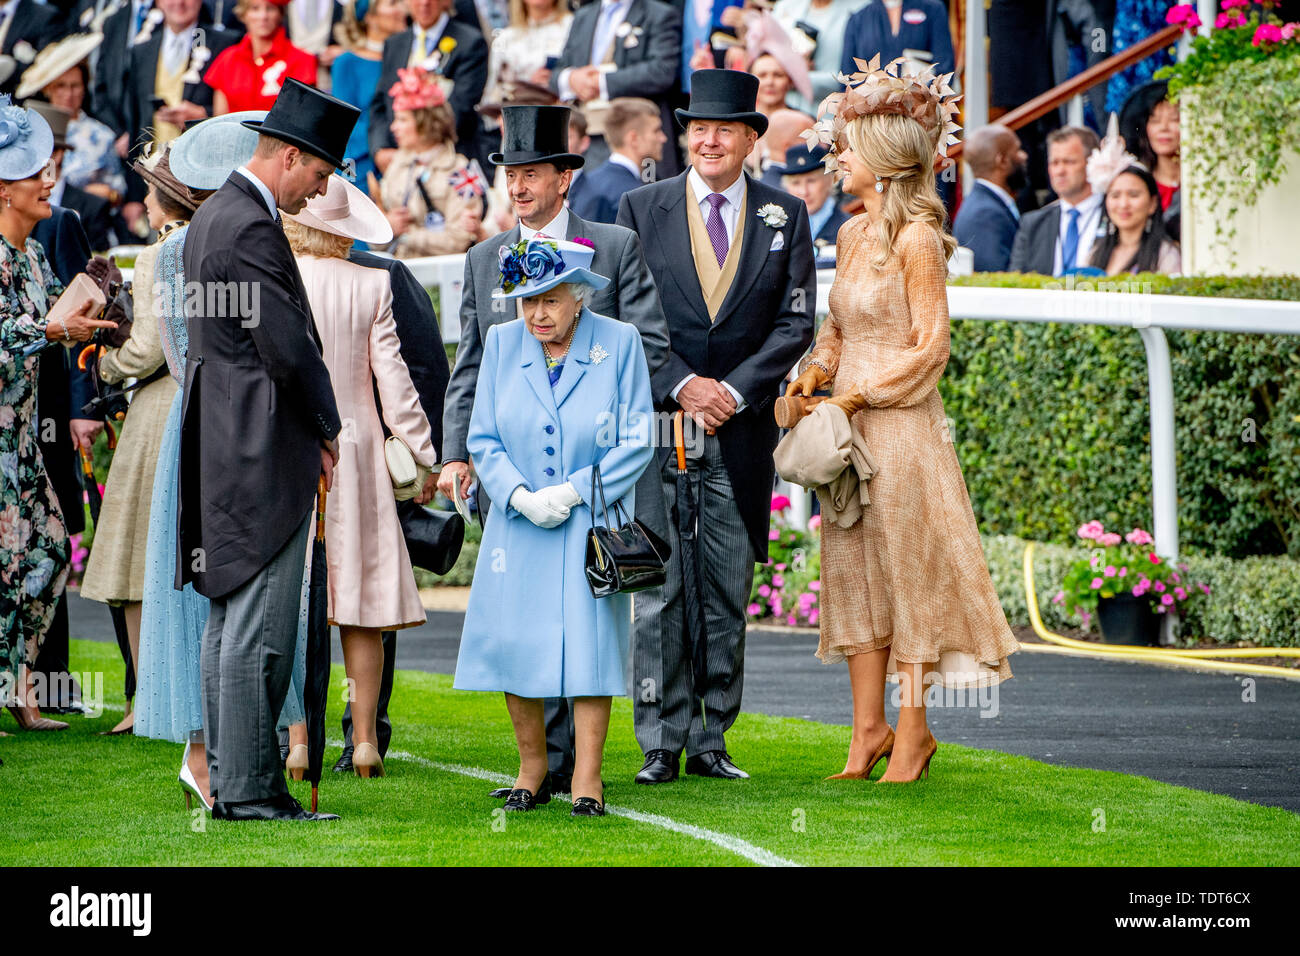 Ascot, UK. 18th June, 2019. King Willem-Alexander and Queen Maxima visit Royal Ascot with Queen Elizabeth, Prince Charles, Camilla Duchess of Cornwall, William and Catherine Duke and Duchess of Cambridge in Ascot, United Kingdom, 18 June 2019. |/Alamy Live News Stock Photo